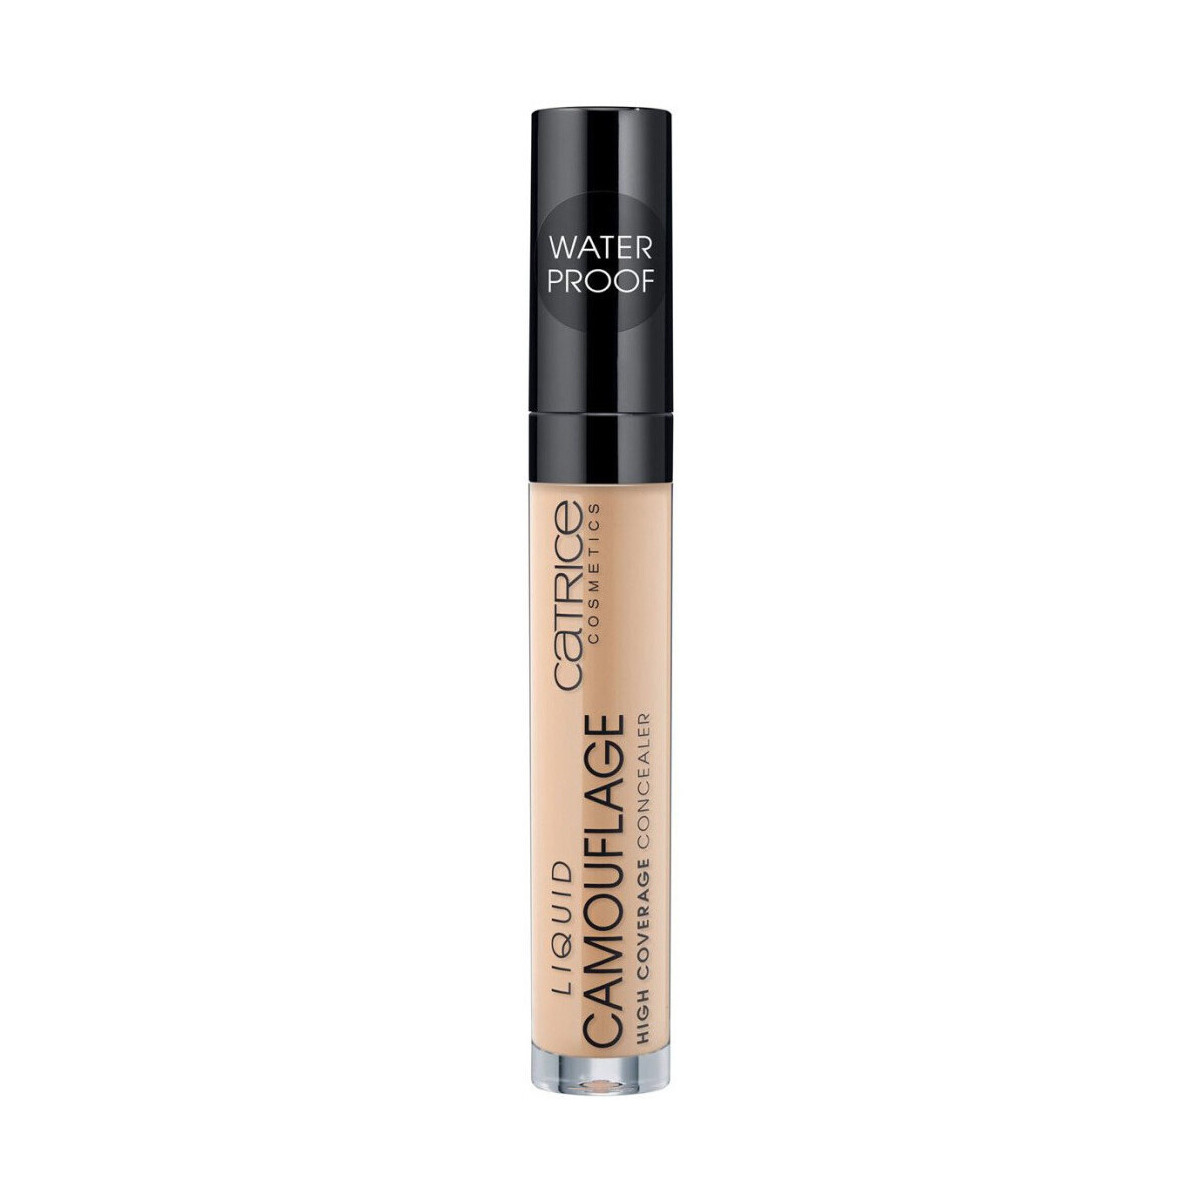 beauty Γυναίκα Concealer & διορθωτικά για τις ρυτίδες Catrice  Yellow